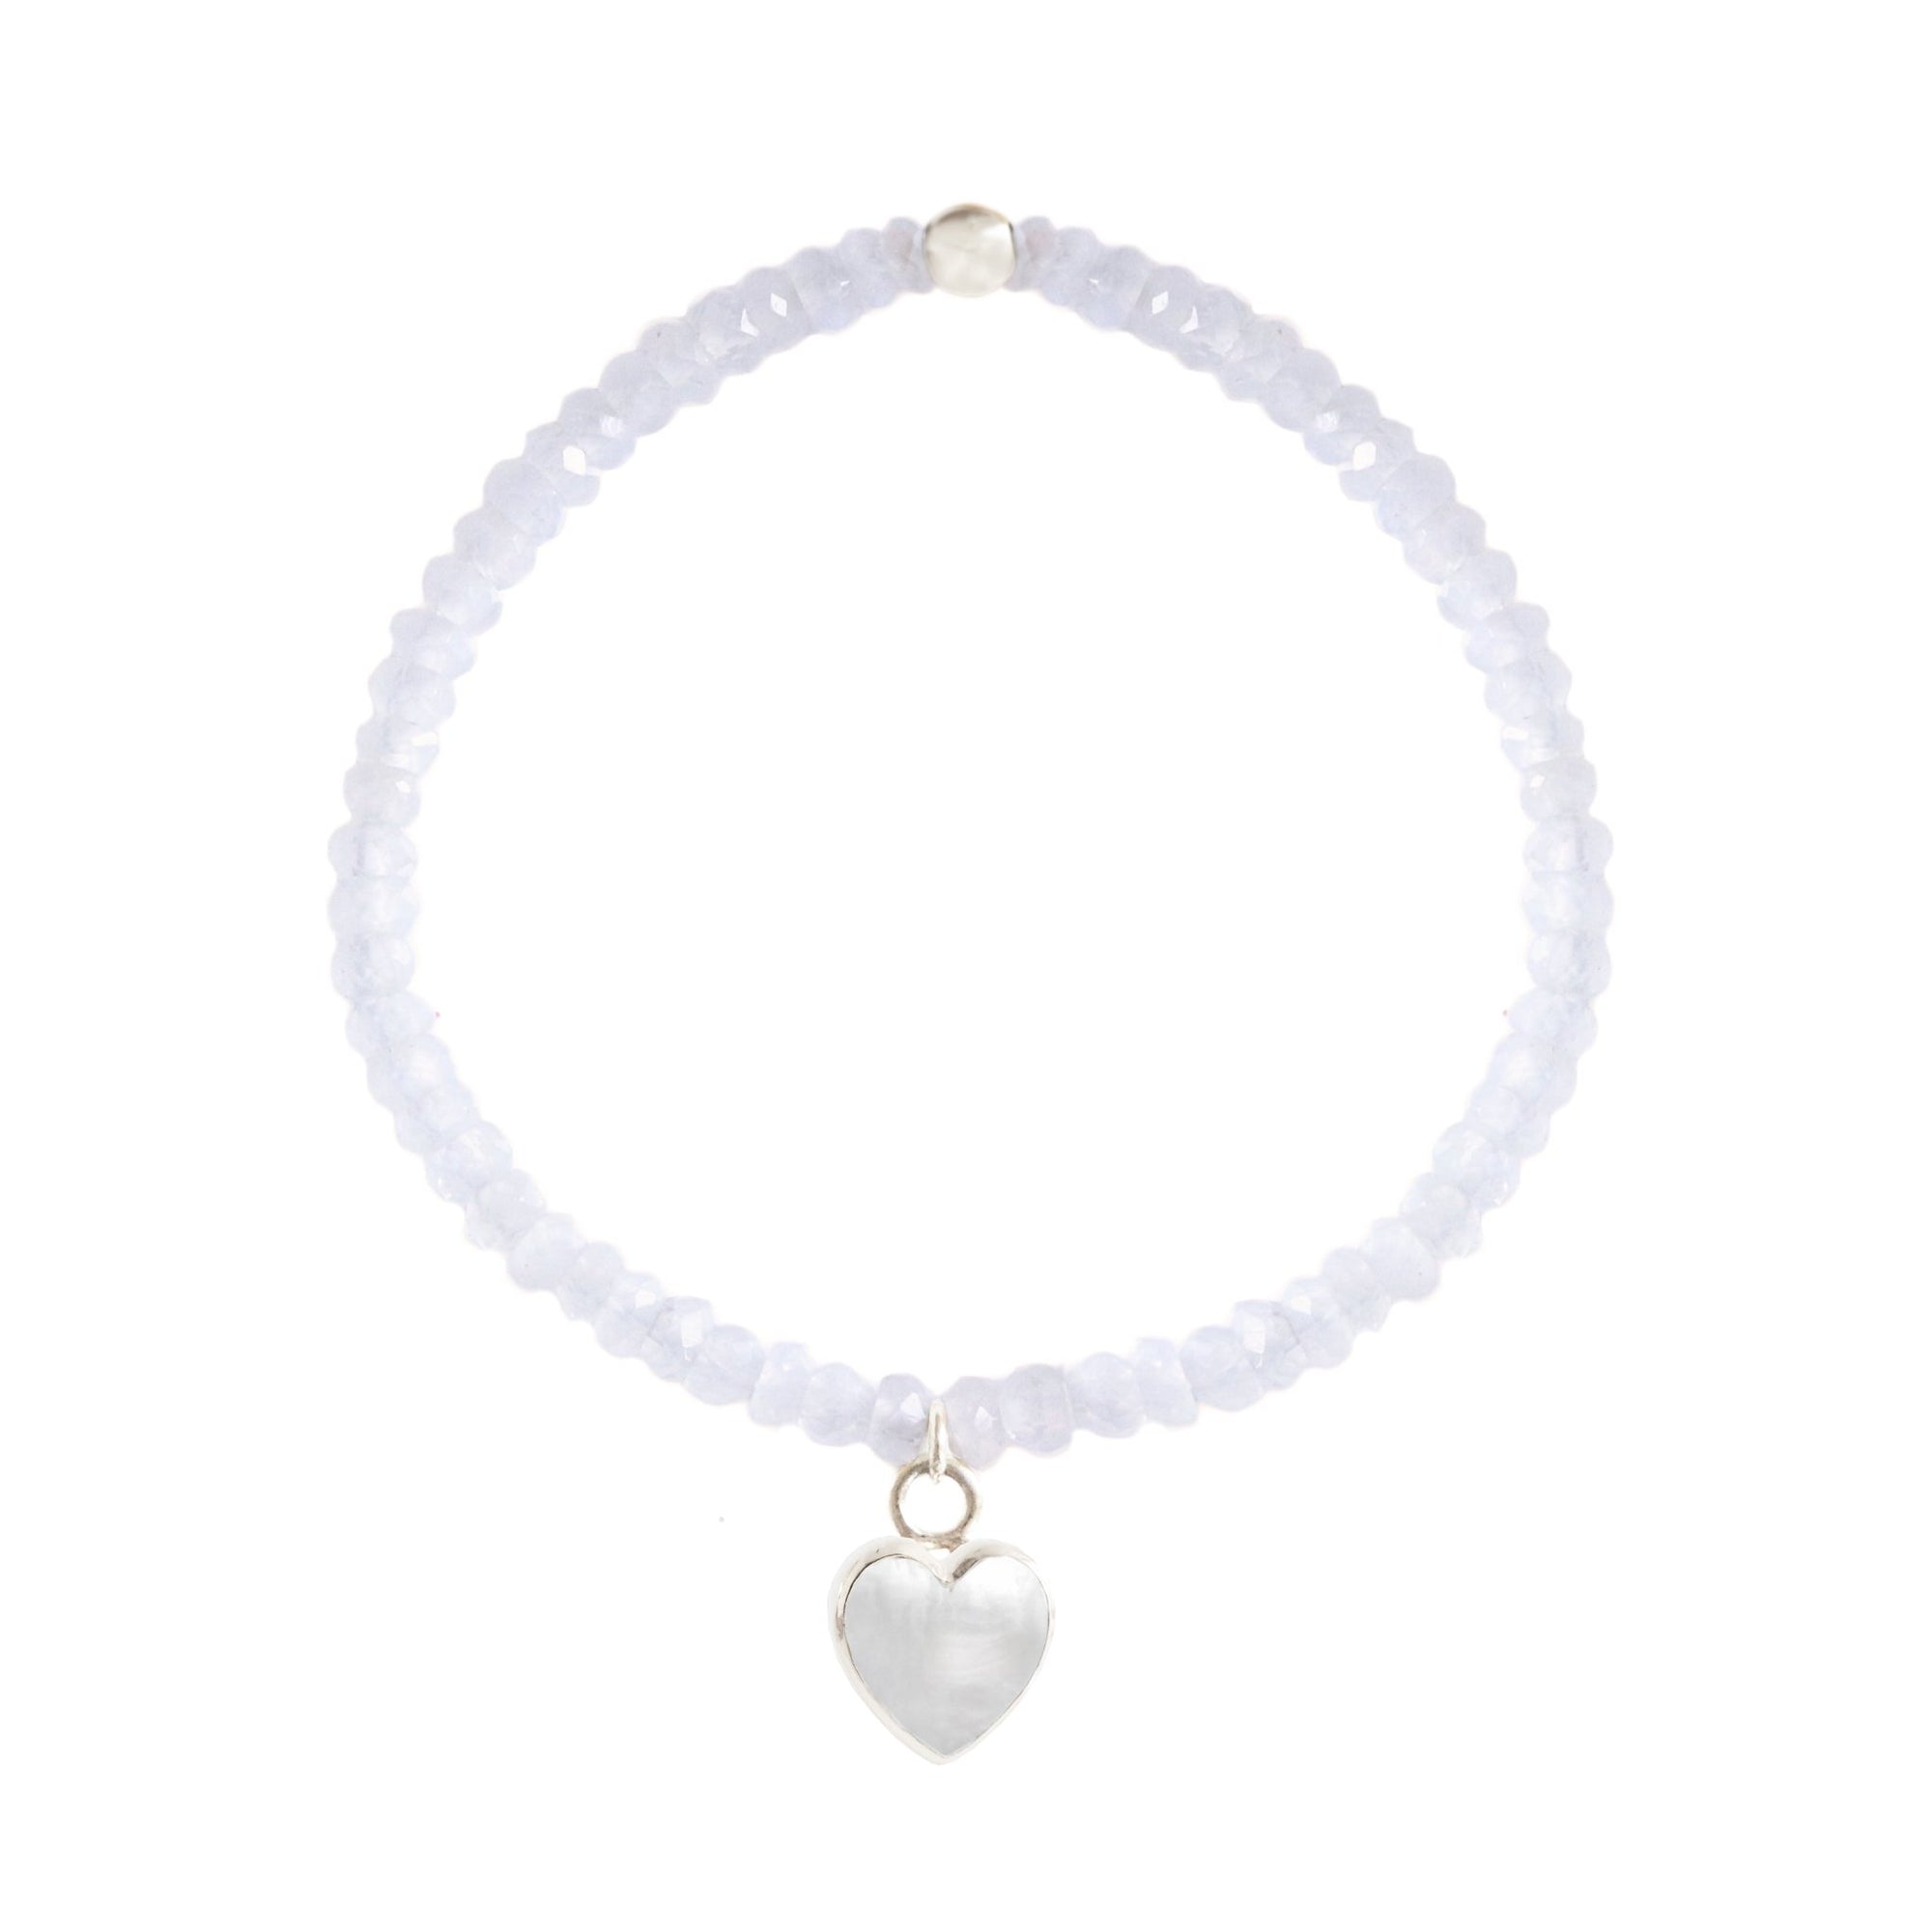 FRAICHE INSPIRE SWEETHEART STRETCH BRACELET - MOONSTONE, MOTHER OF PEARL & SILVER - SO PRETTY CARA COTTER